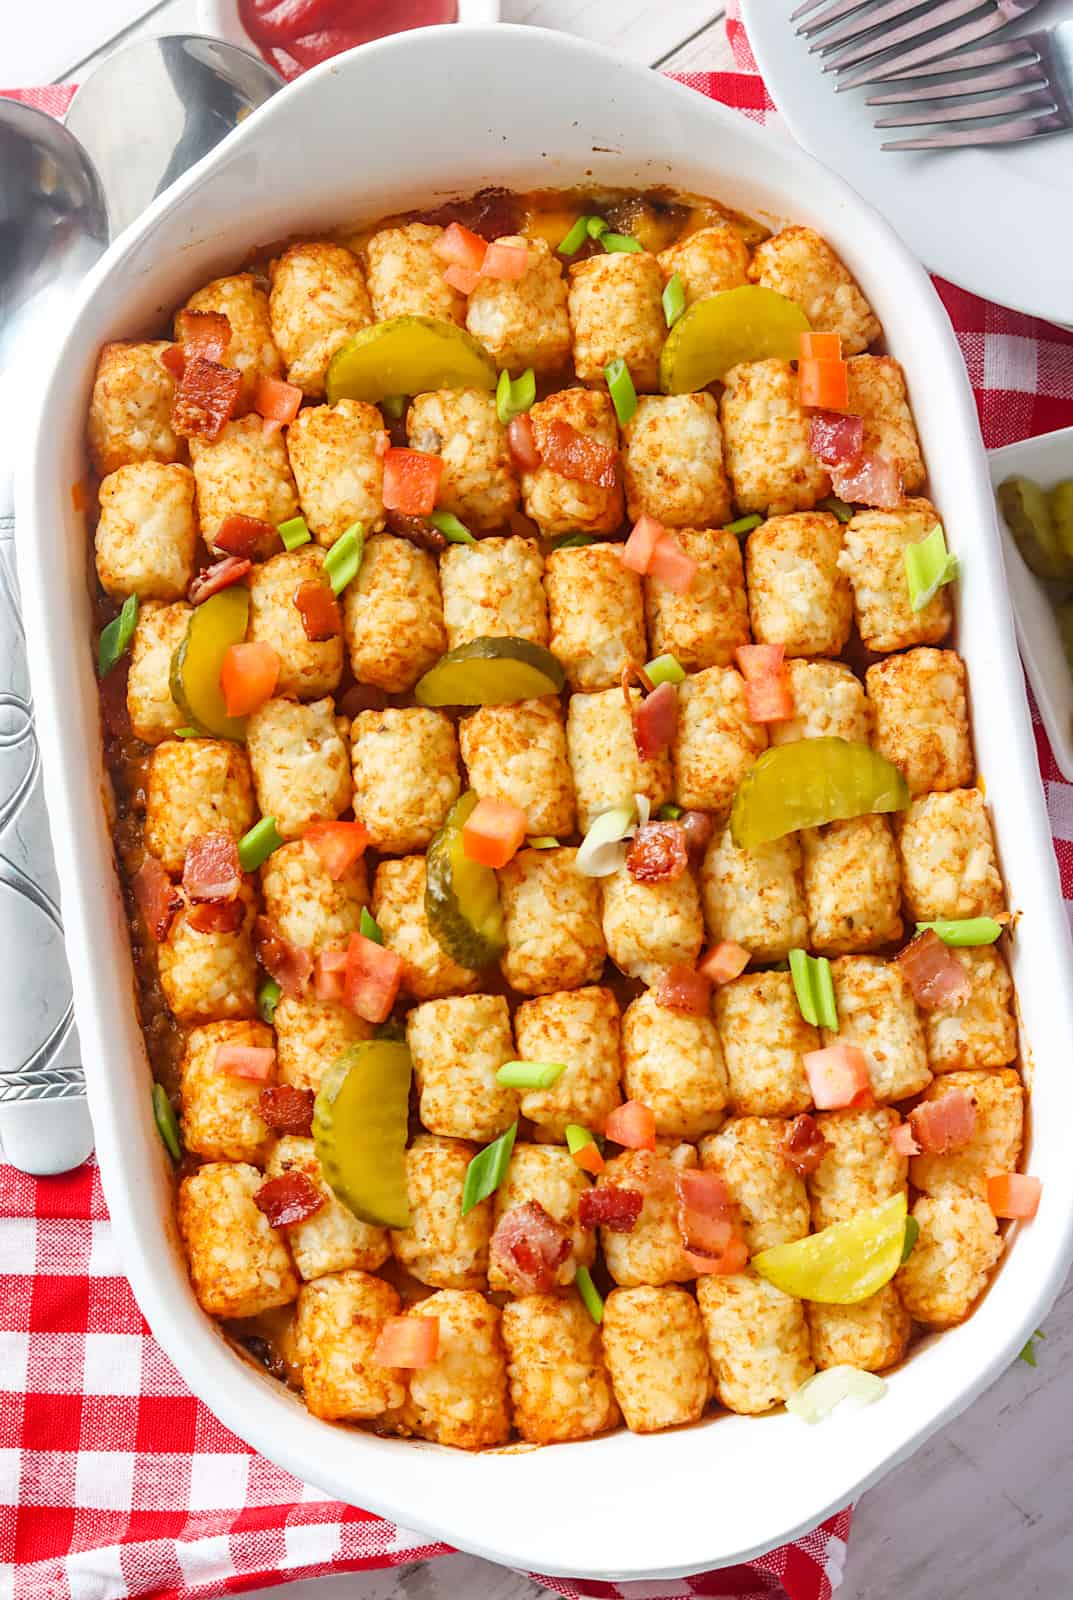 Cheeseburger tater tot casserole fresh from the oven